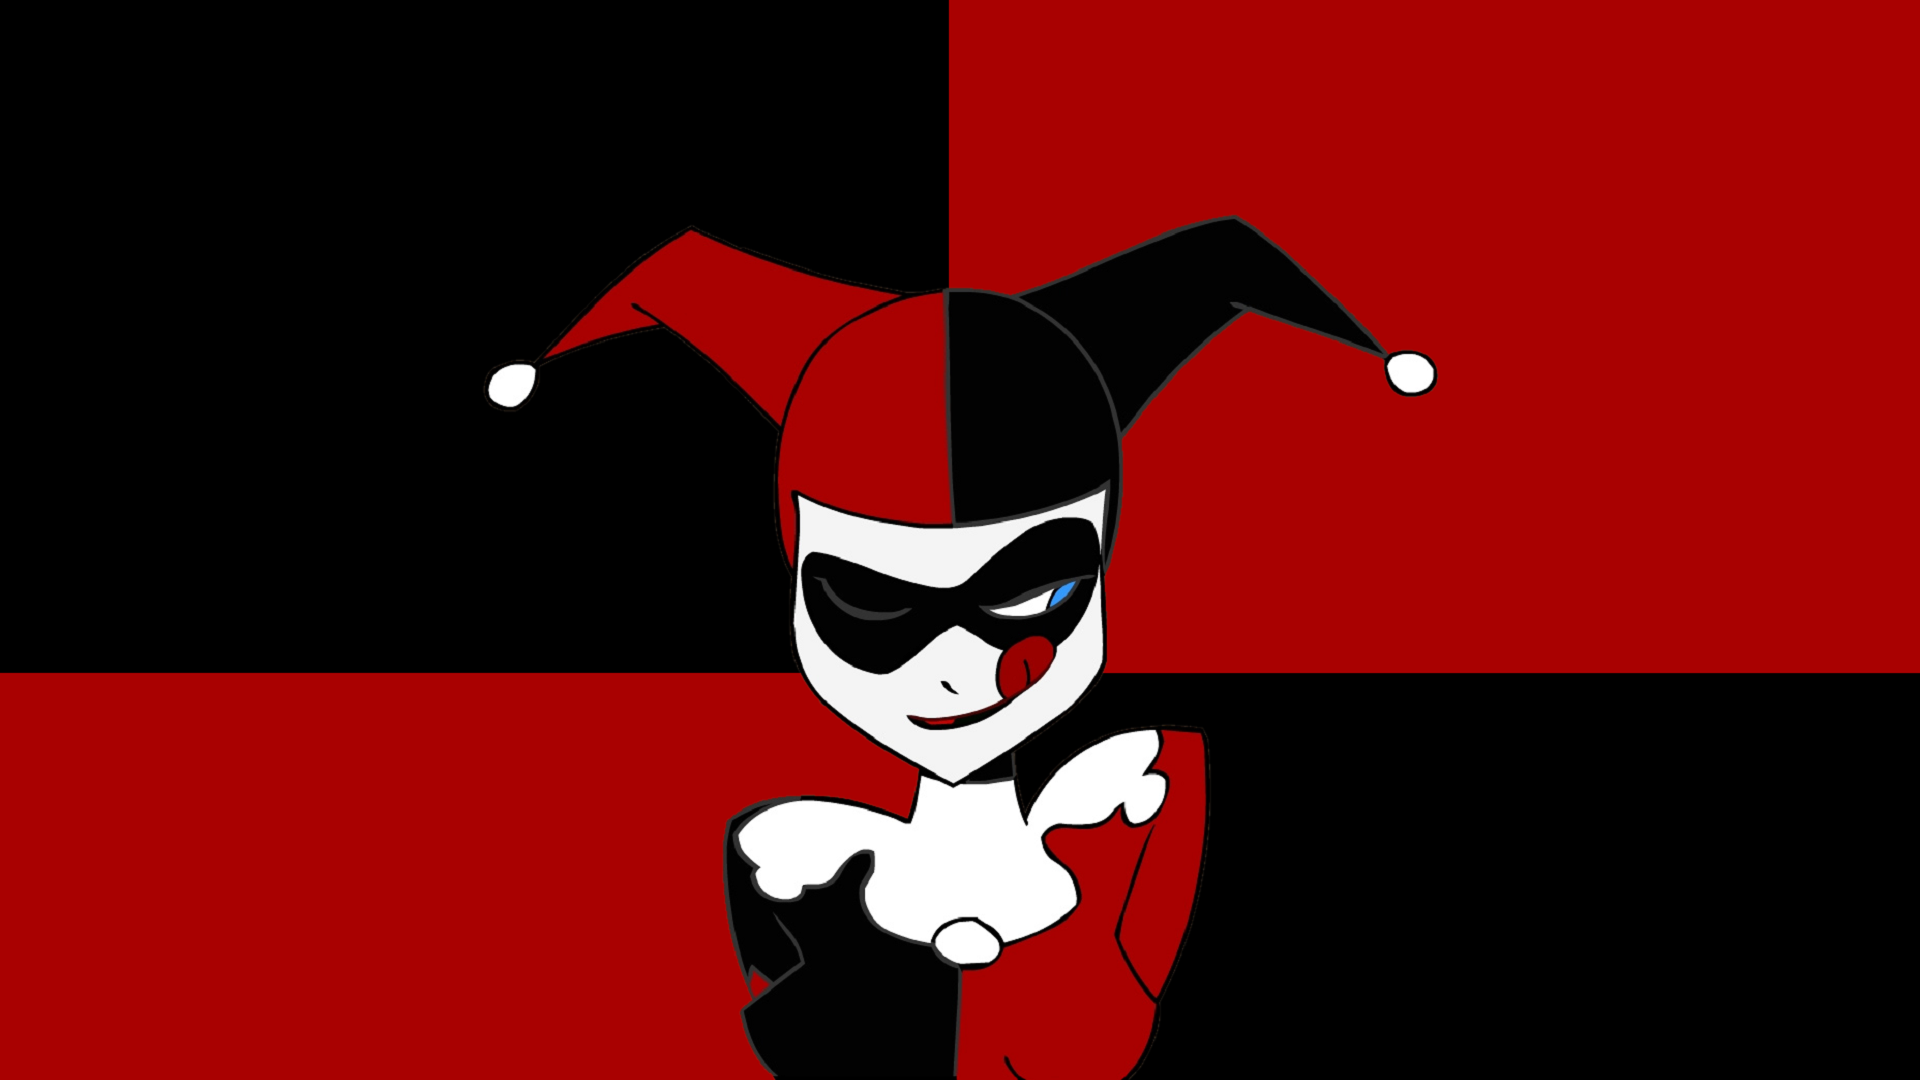 420+ Harley Quinn HD Wallpapers and Backgrounds